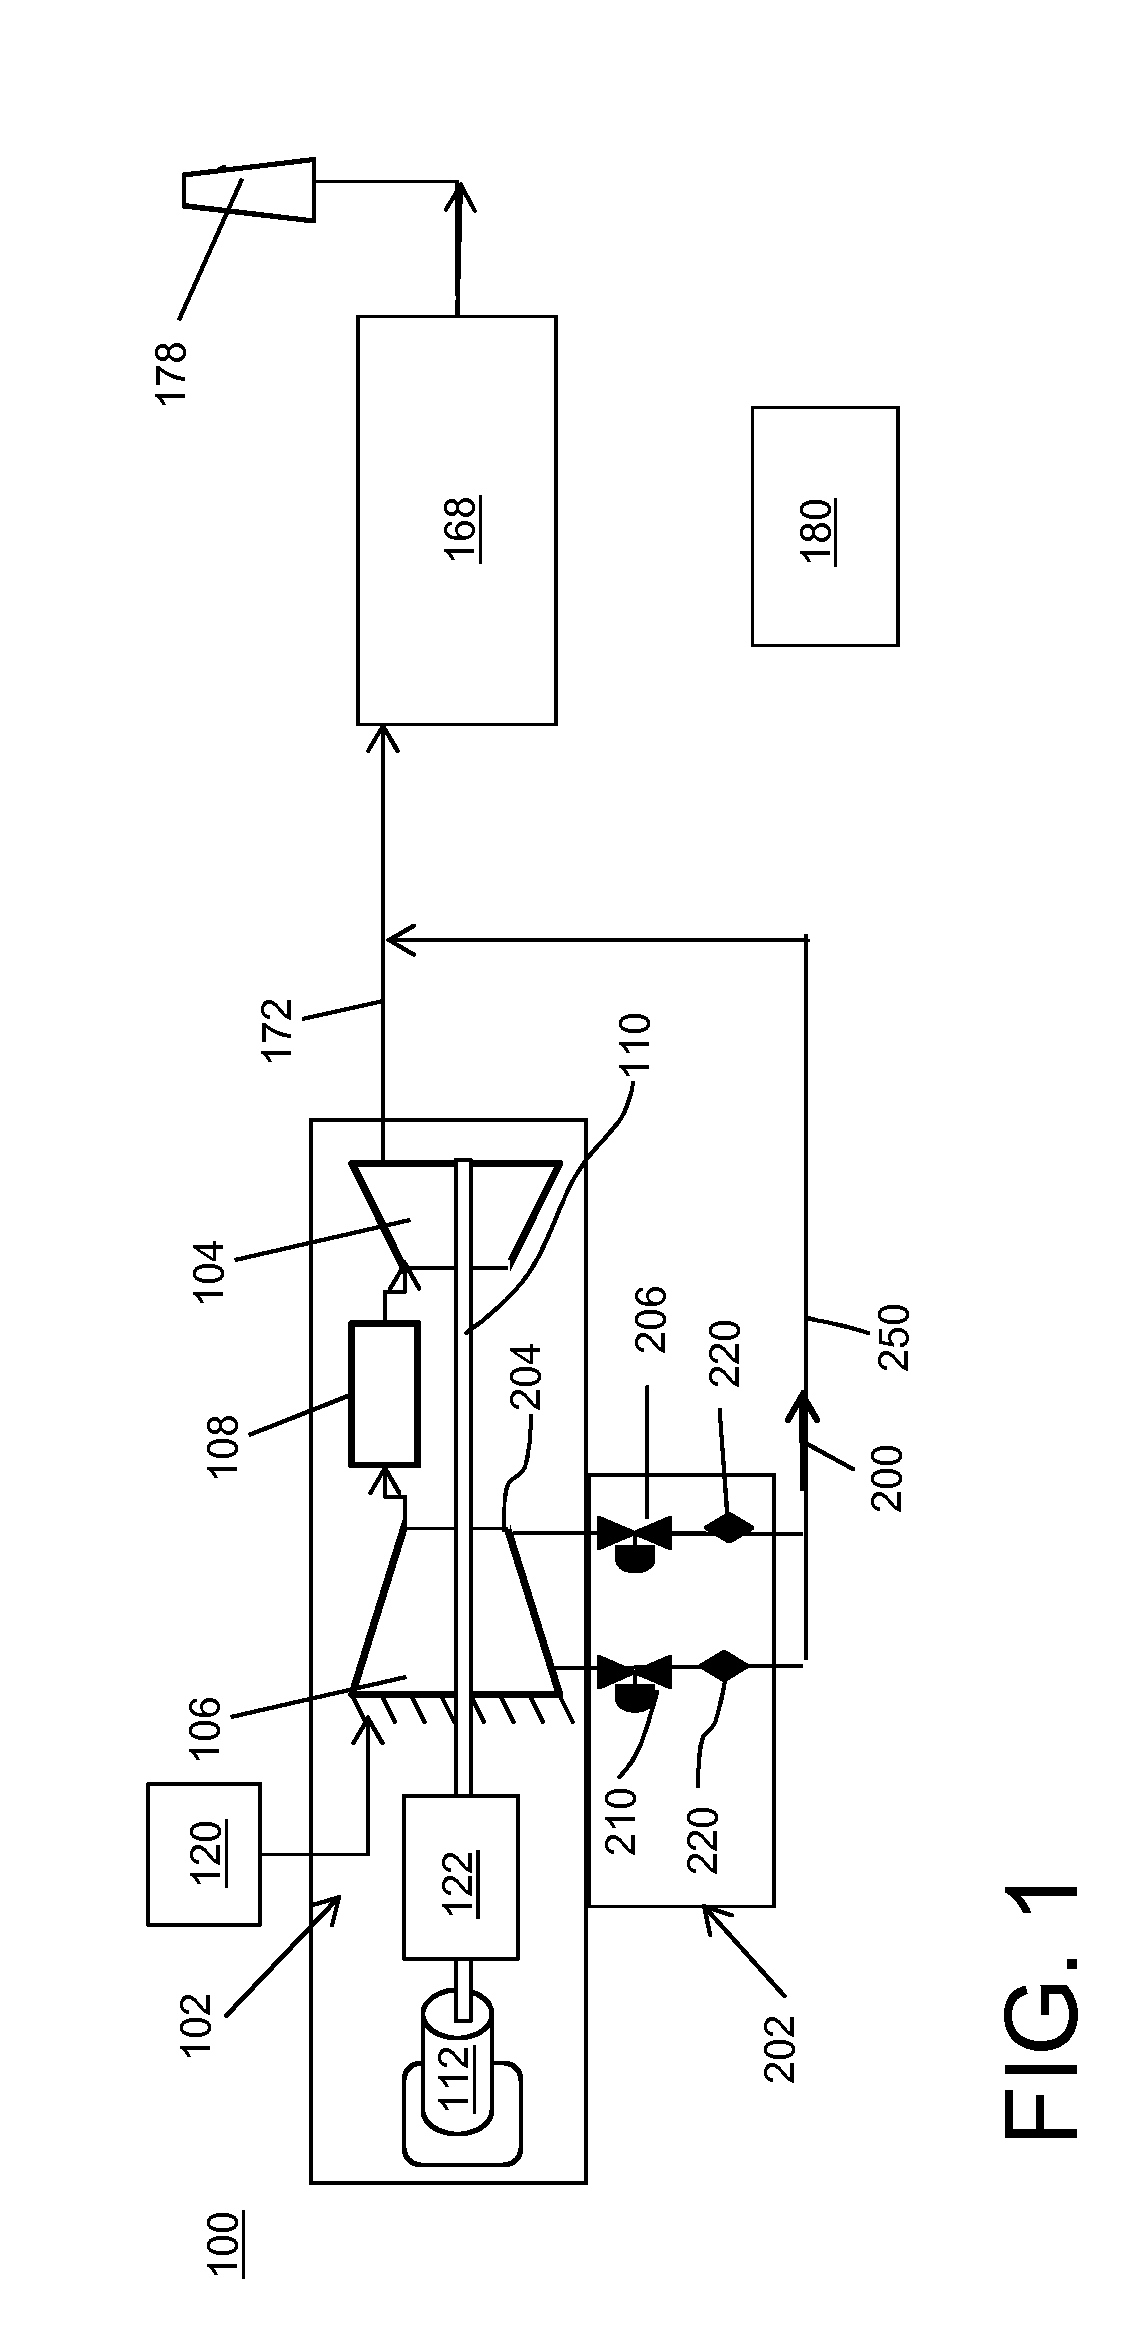 Power generation system having compressor creating excess air flow for scr unit